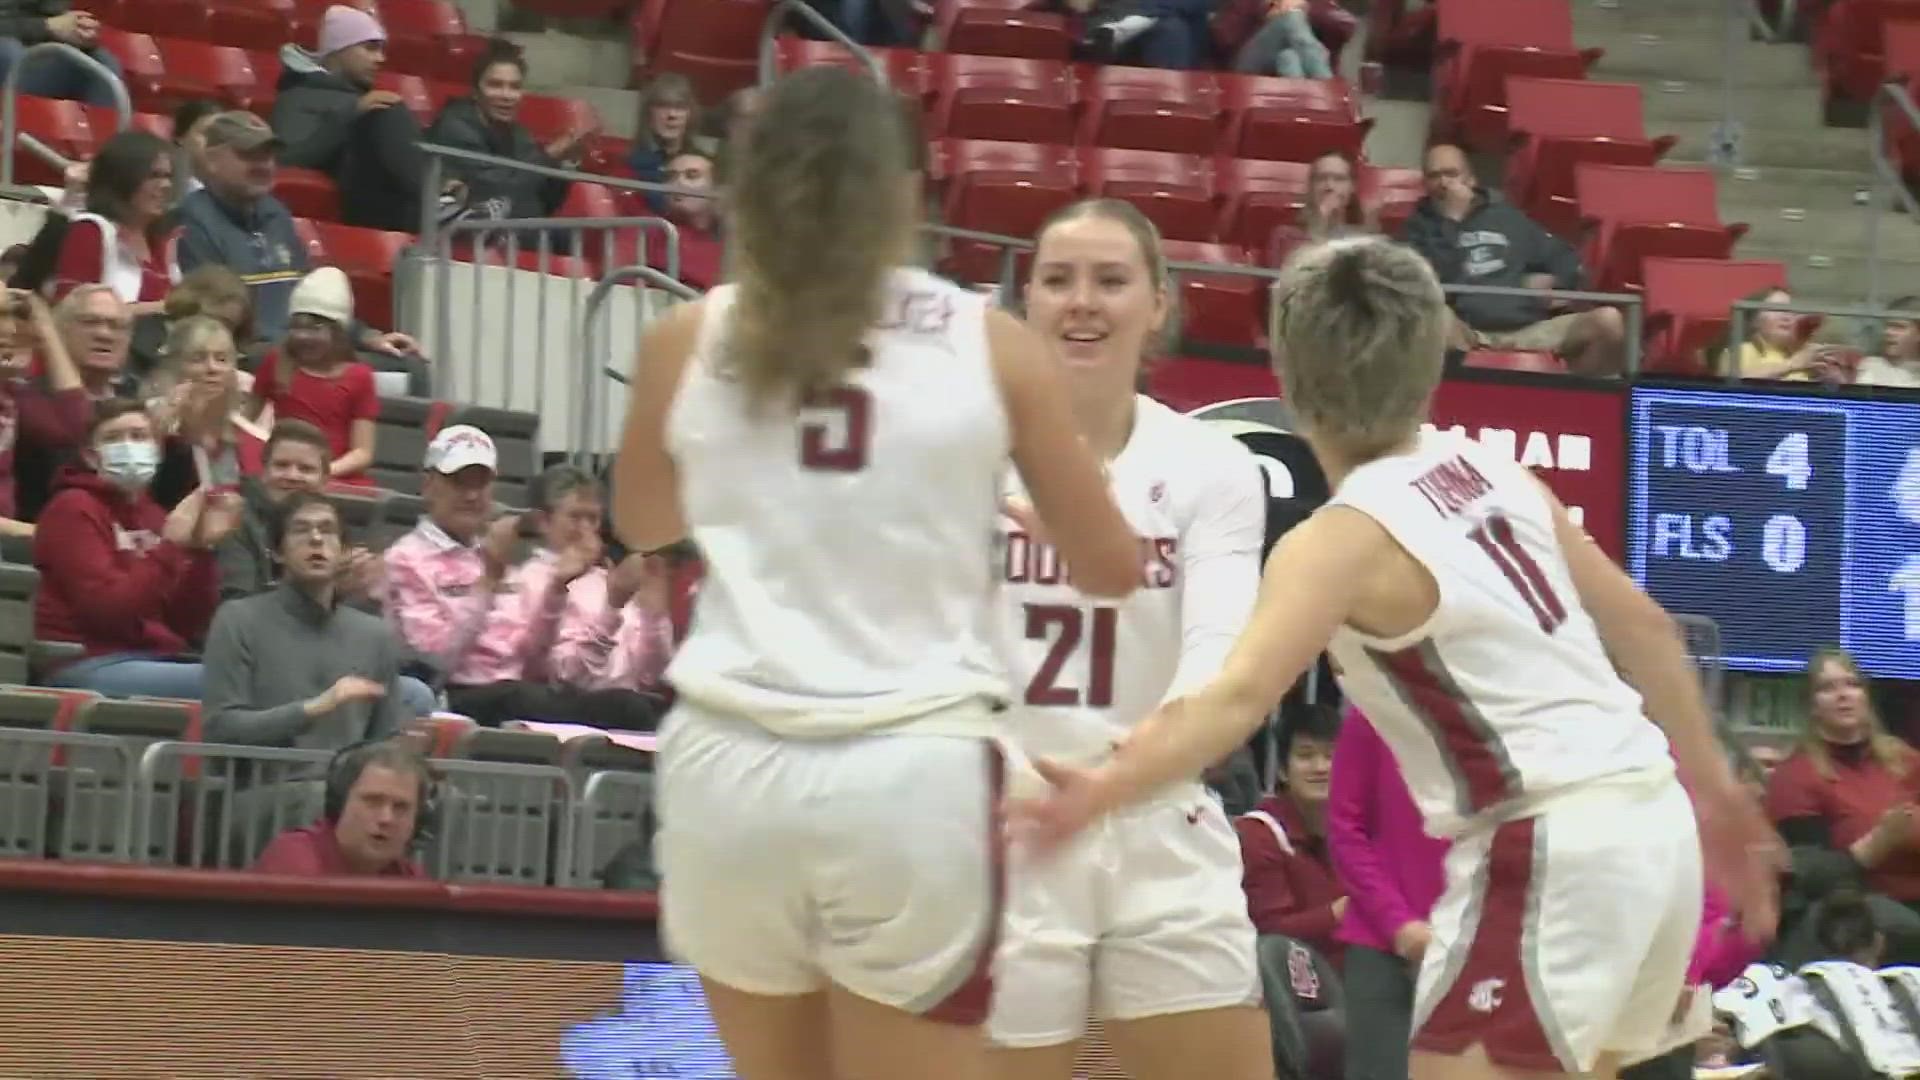 Seniors Bella Murekatete and Johanna Teder finished in double-figures to lead Washington State women's basketball to a win over Oregon.